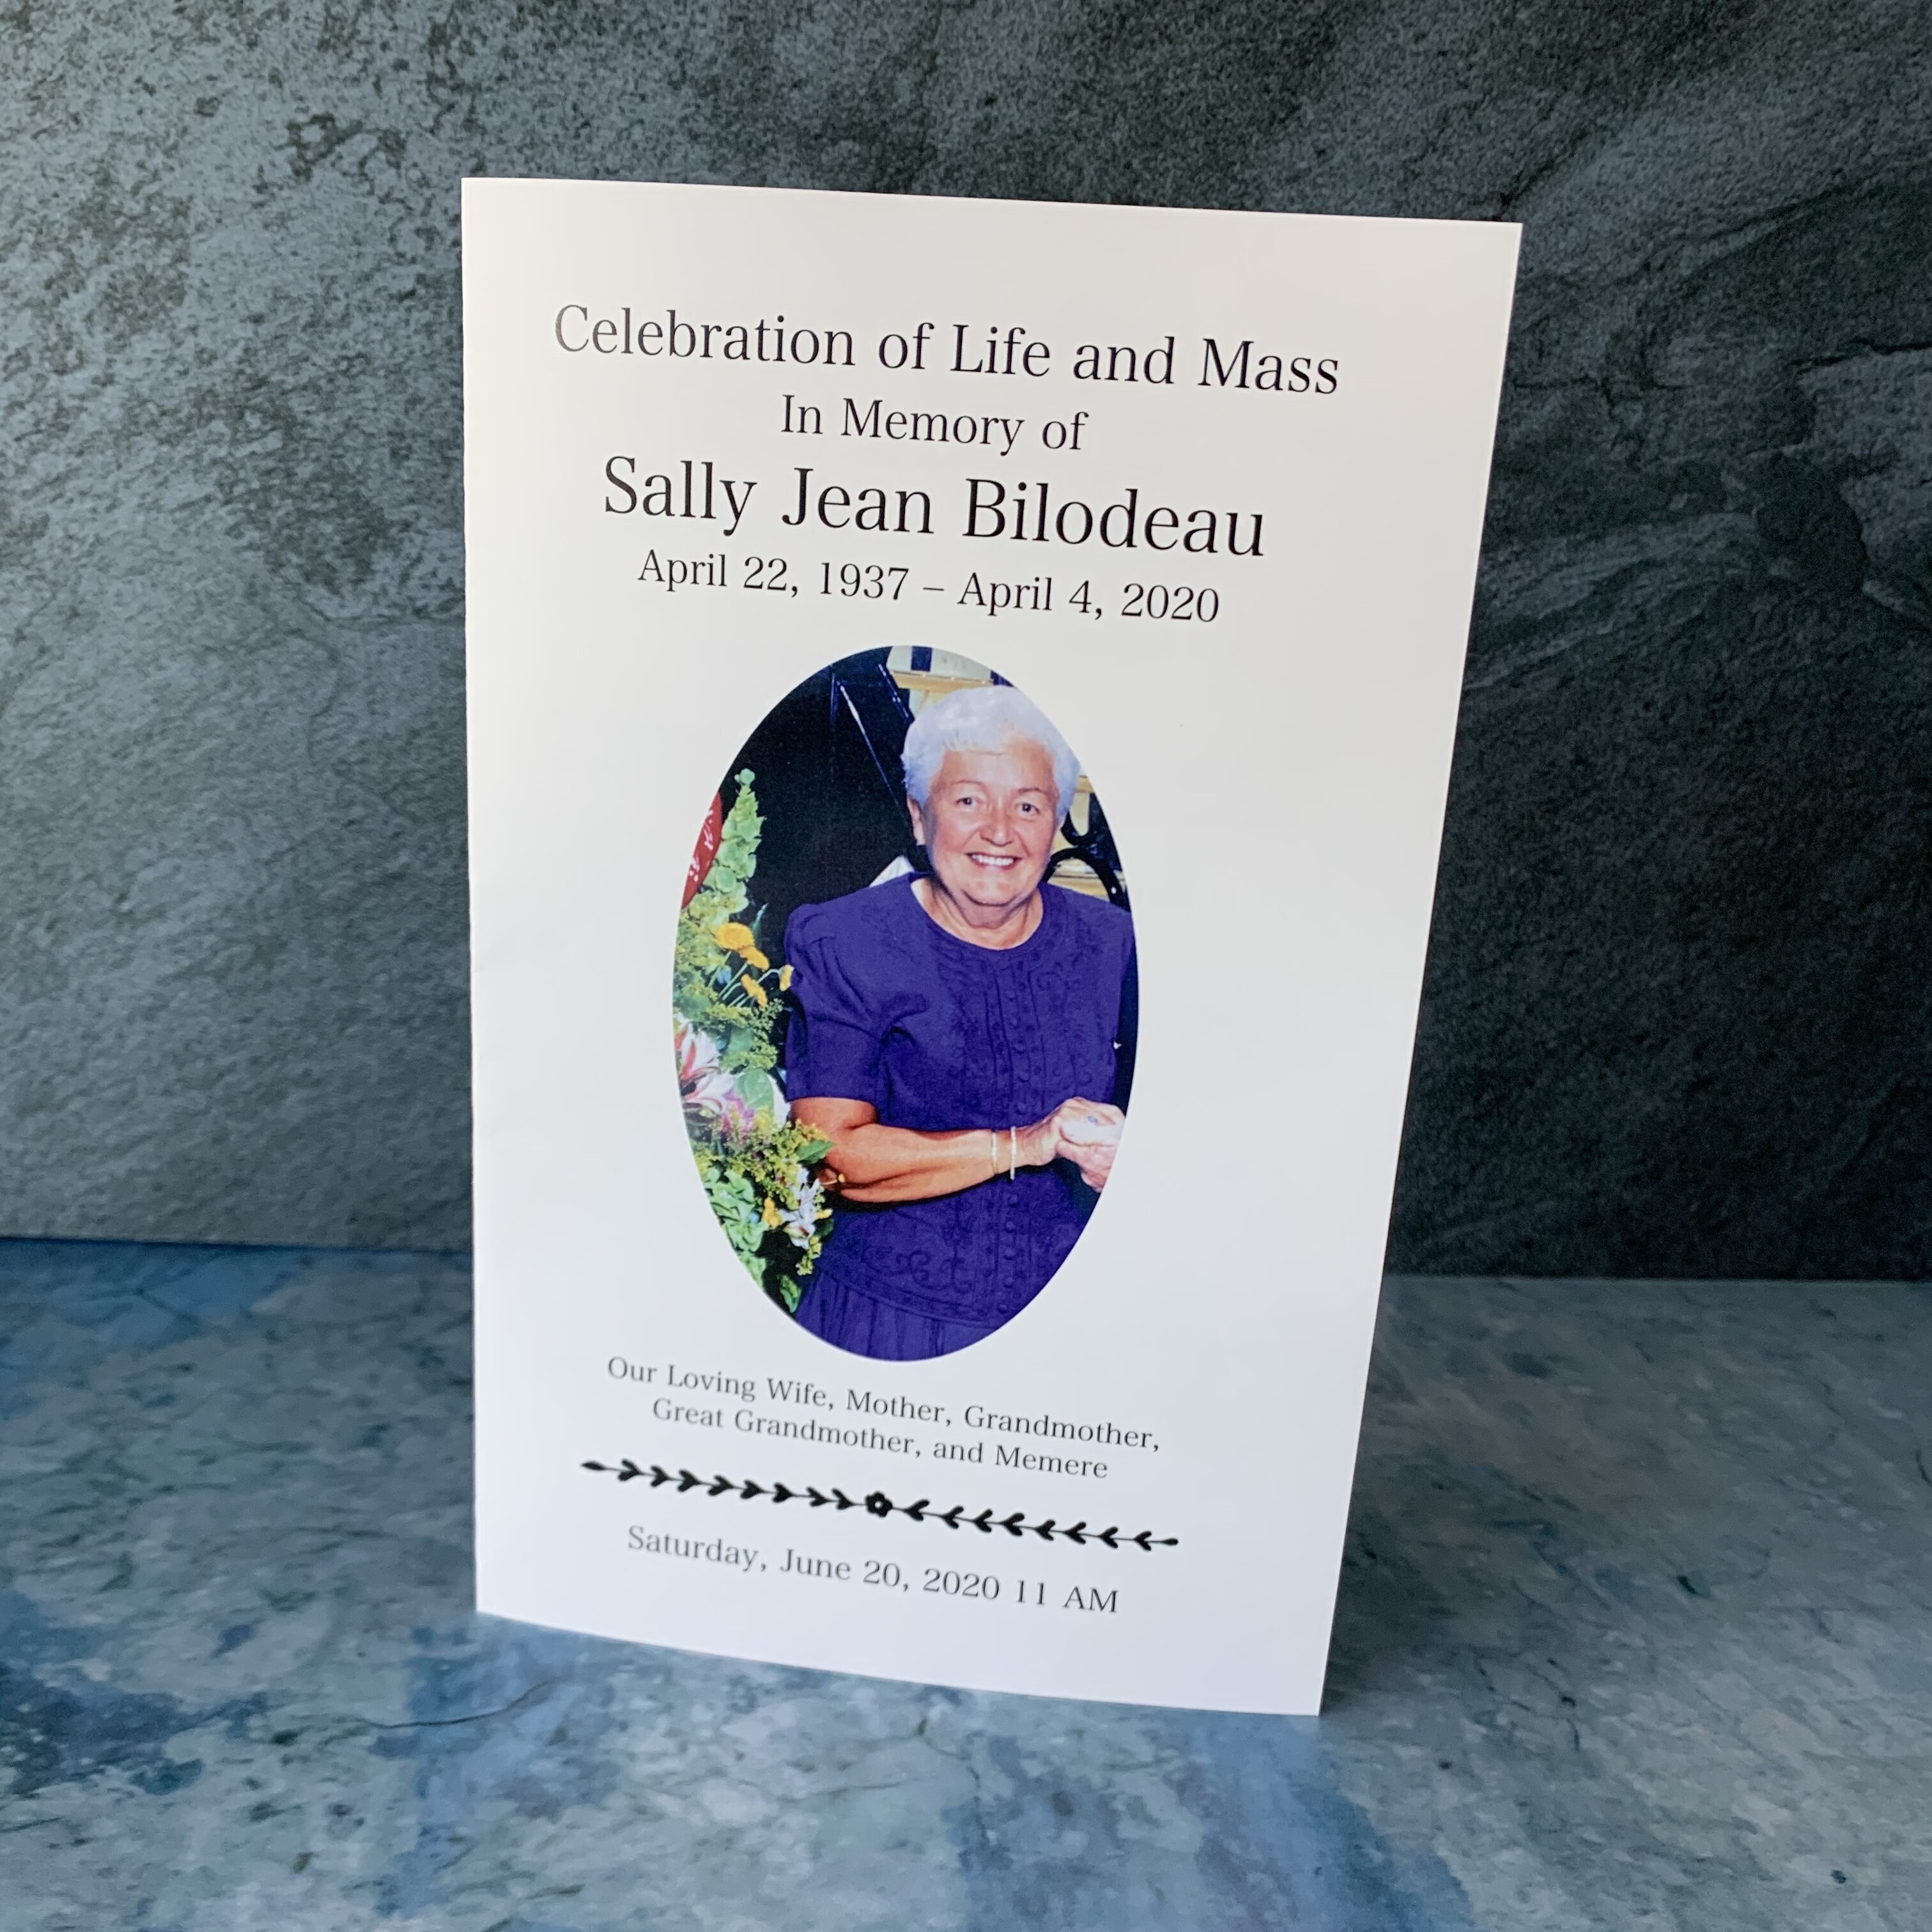 Programs for Celebration of Life / Memorial Services